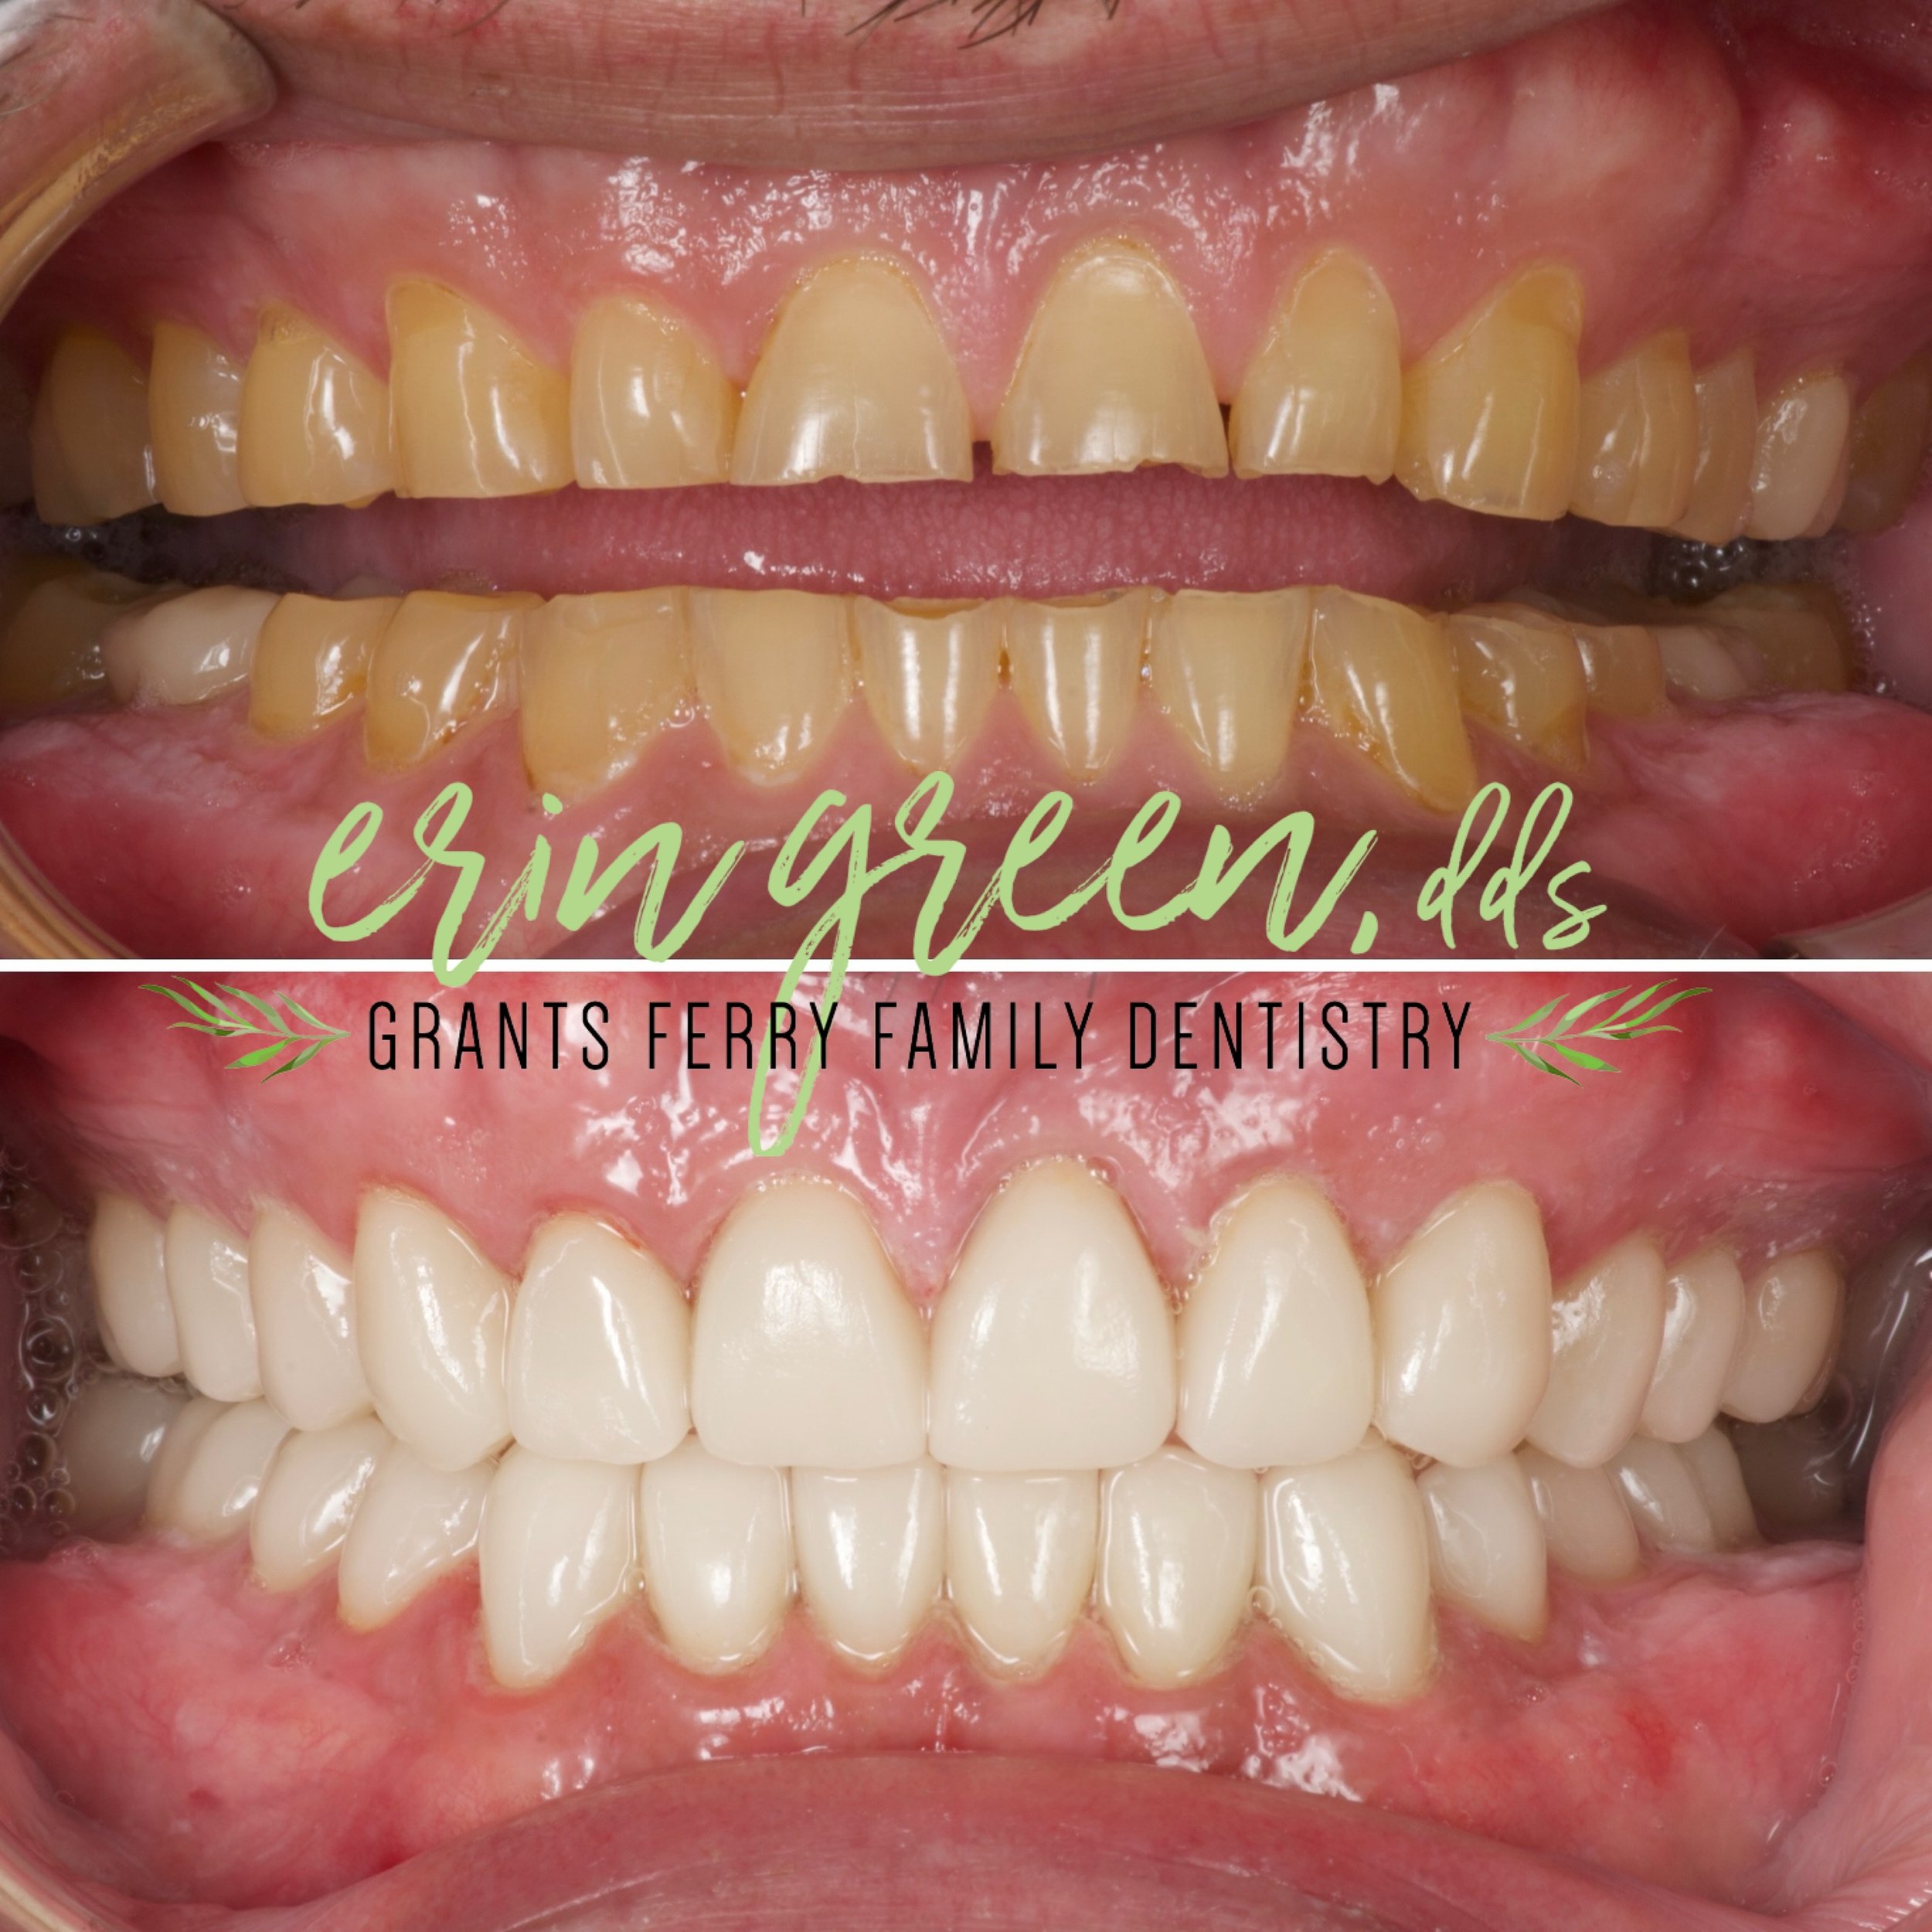 🌟 Smile Transformation Alert! 🌟

📸 Check out this amazing smile makeover! Years of grinding and clenching took its toll, but the results speak for themselves! This patient&rsquo;s smile is now healthier, more attractive, and full of confidence.
&b